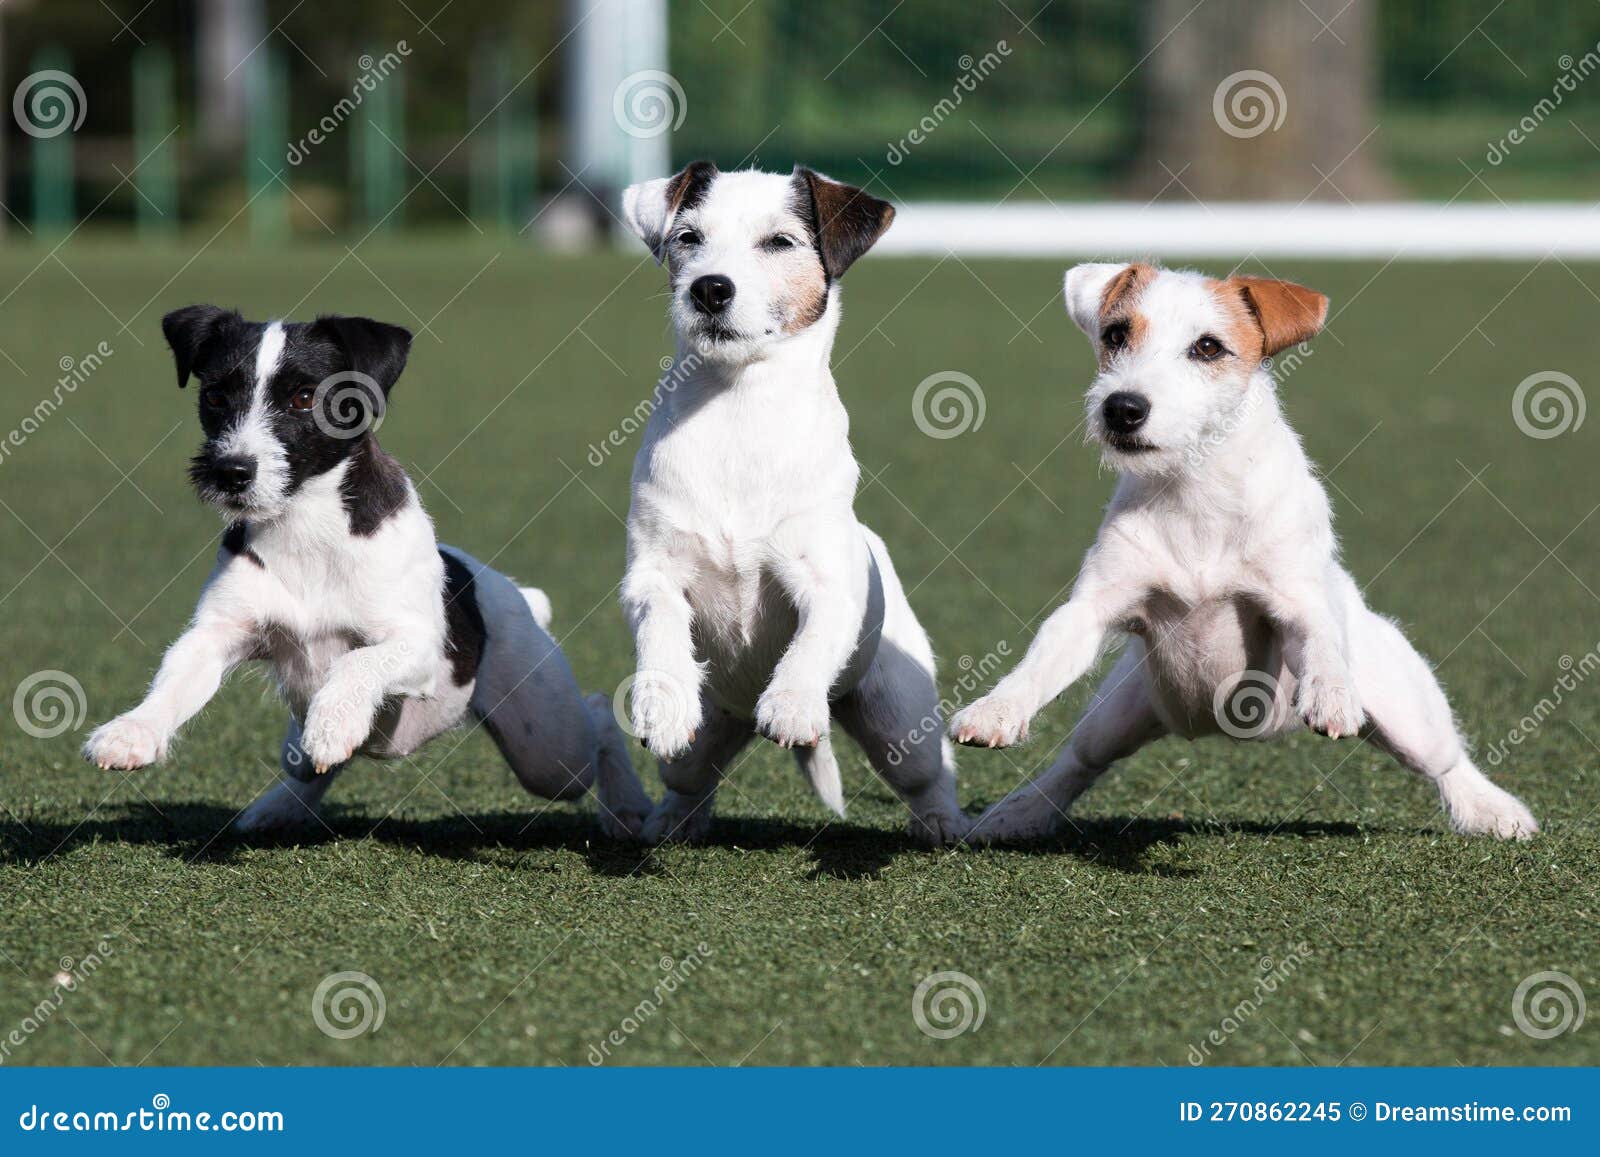 funny running parsons parson russell terrier with sable and black markings on a face